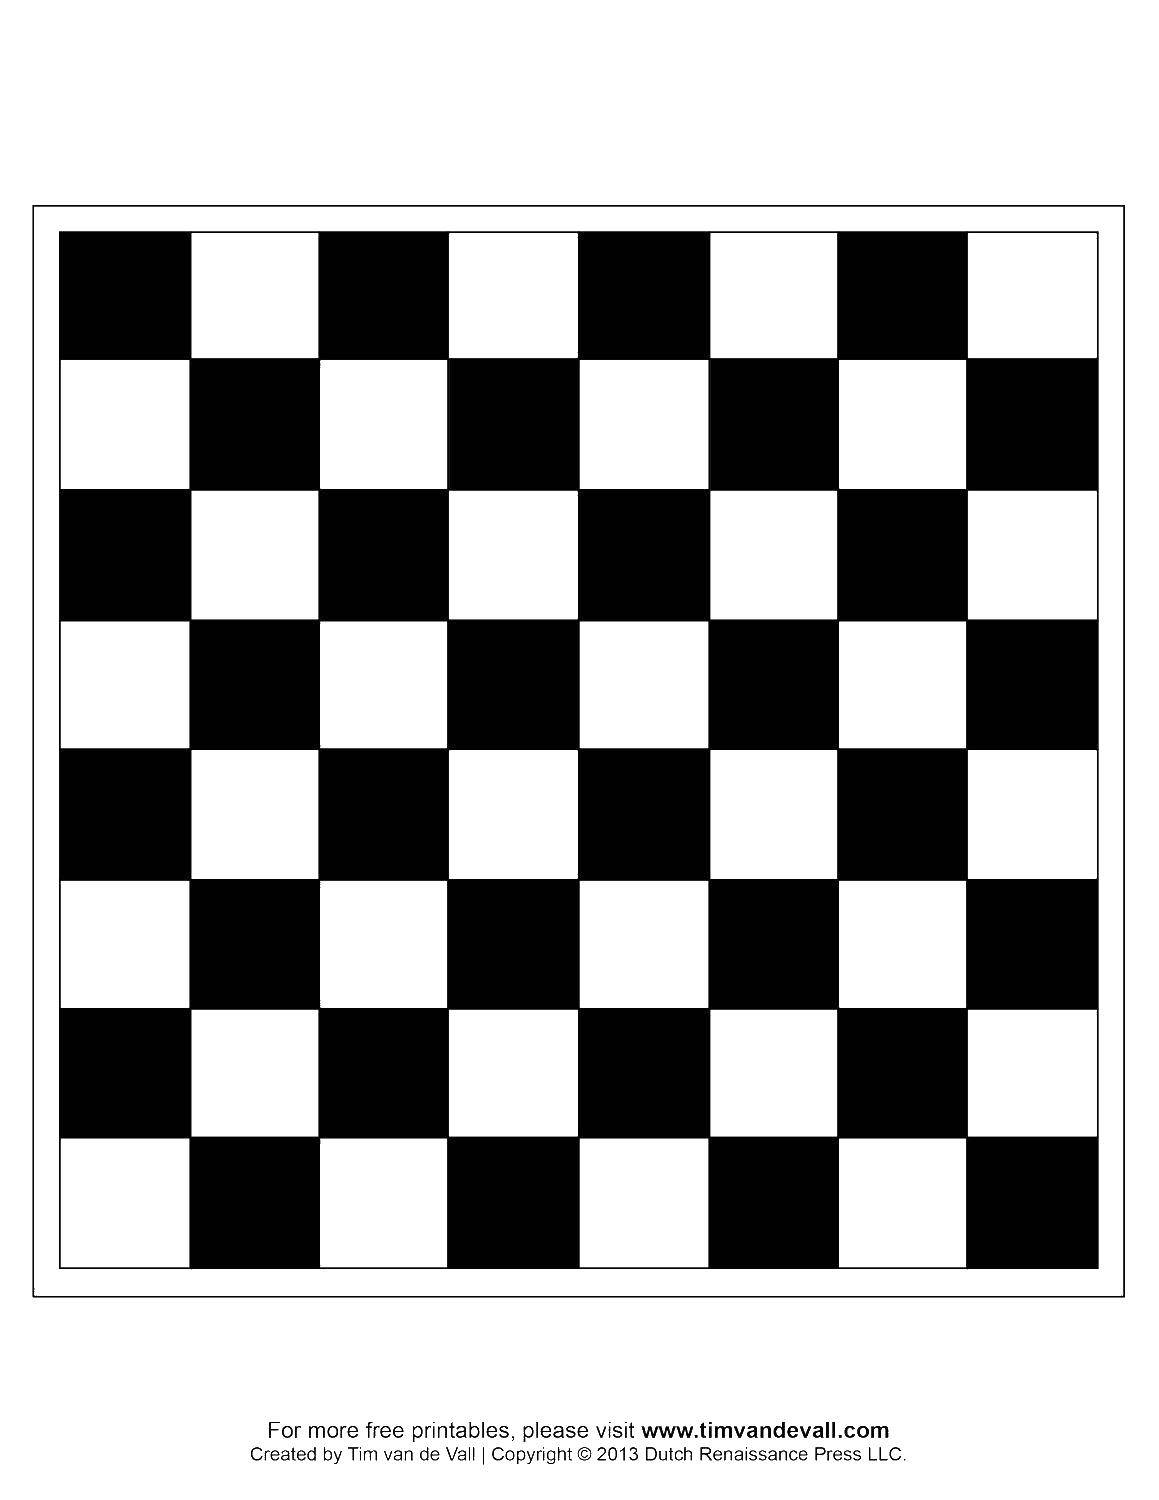 Coloring Chess Board. Category Chess. Tags:  chess , Board.